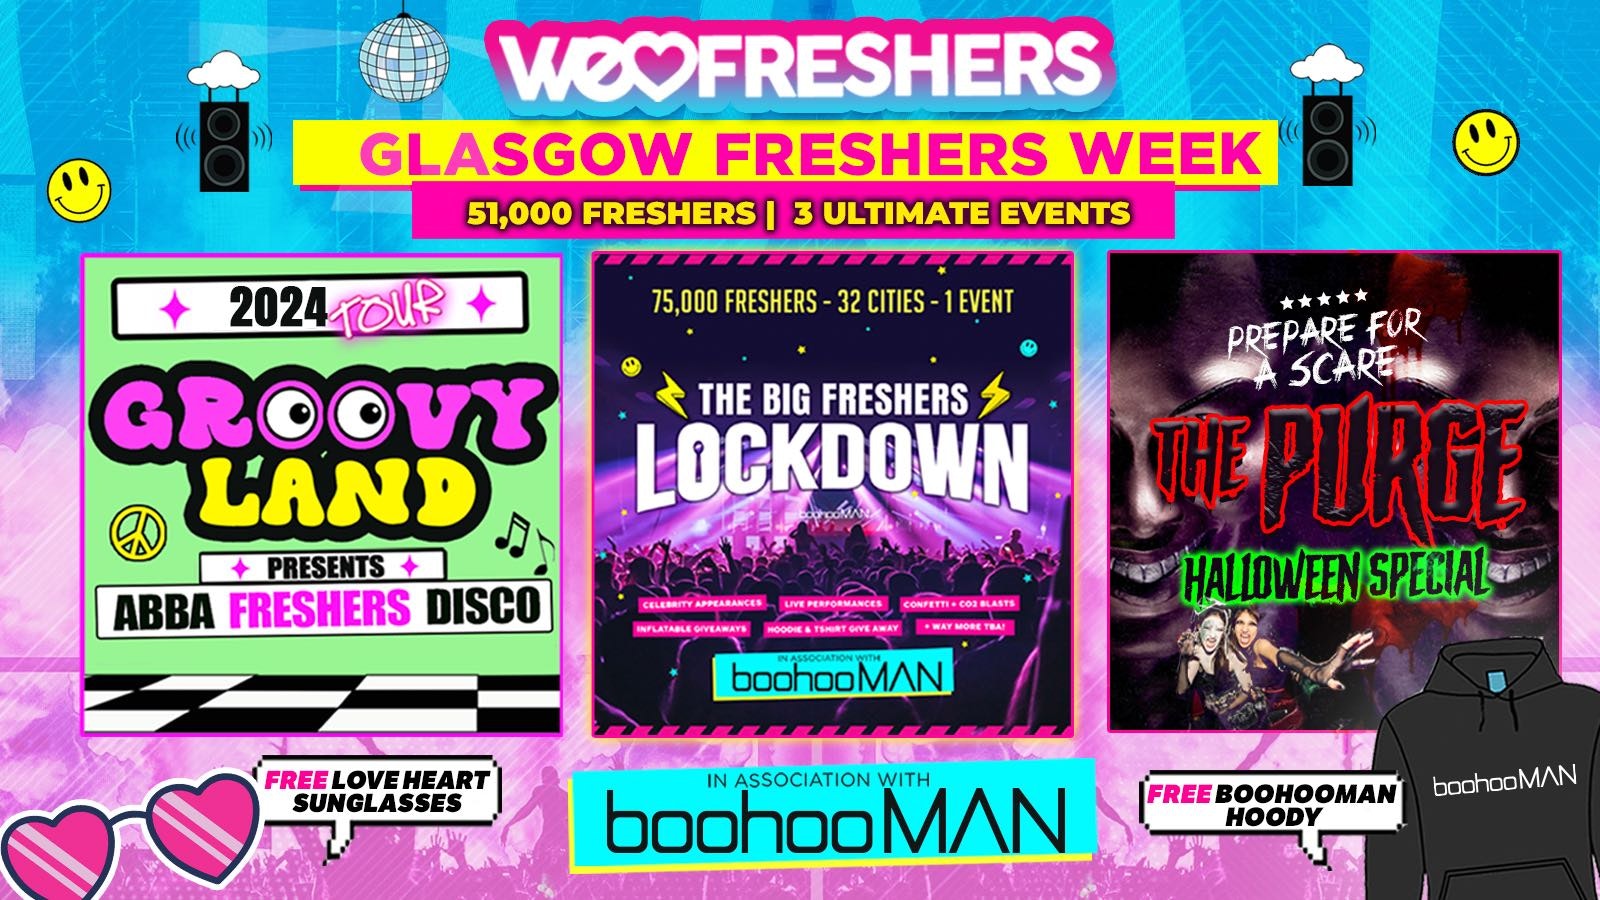 WE LOVE GLASGOW FRESHERS 2024 in association with boohooMAN ❗FREE BOOHOOMAN HOODY TODAY ONLY❗